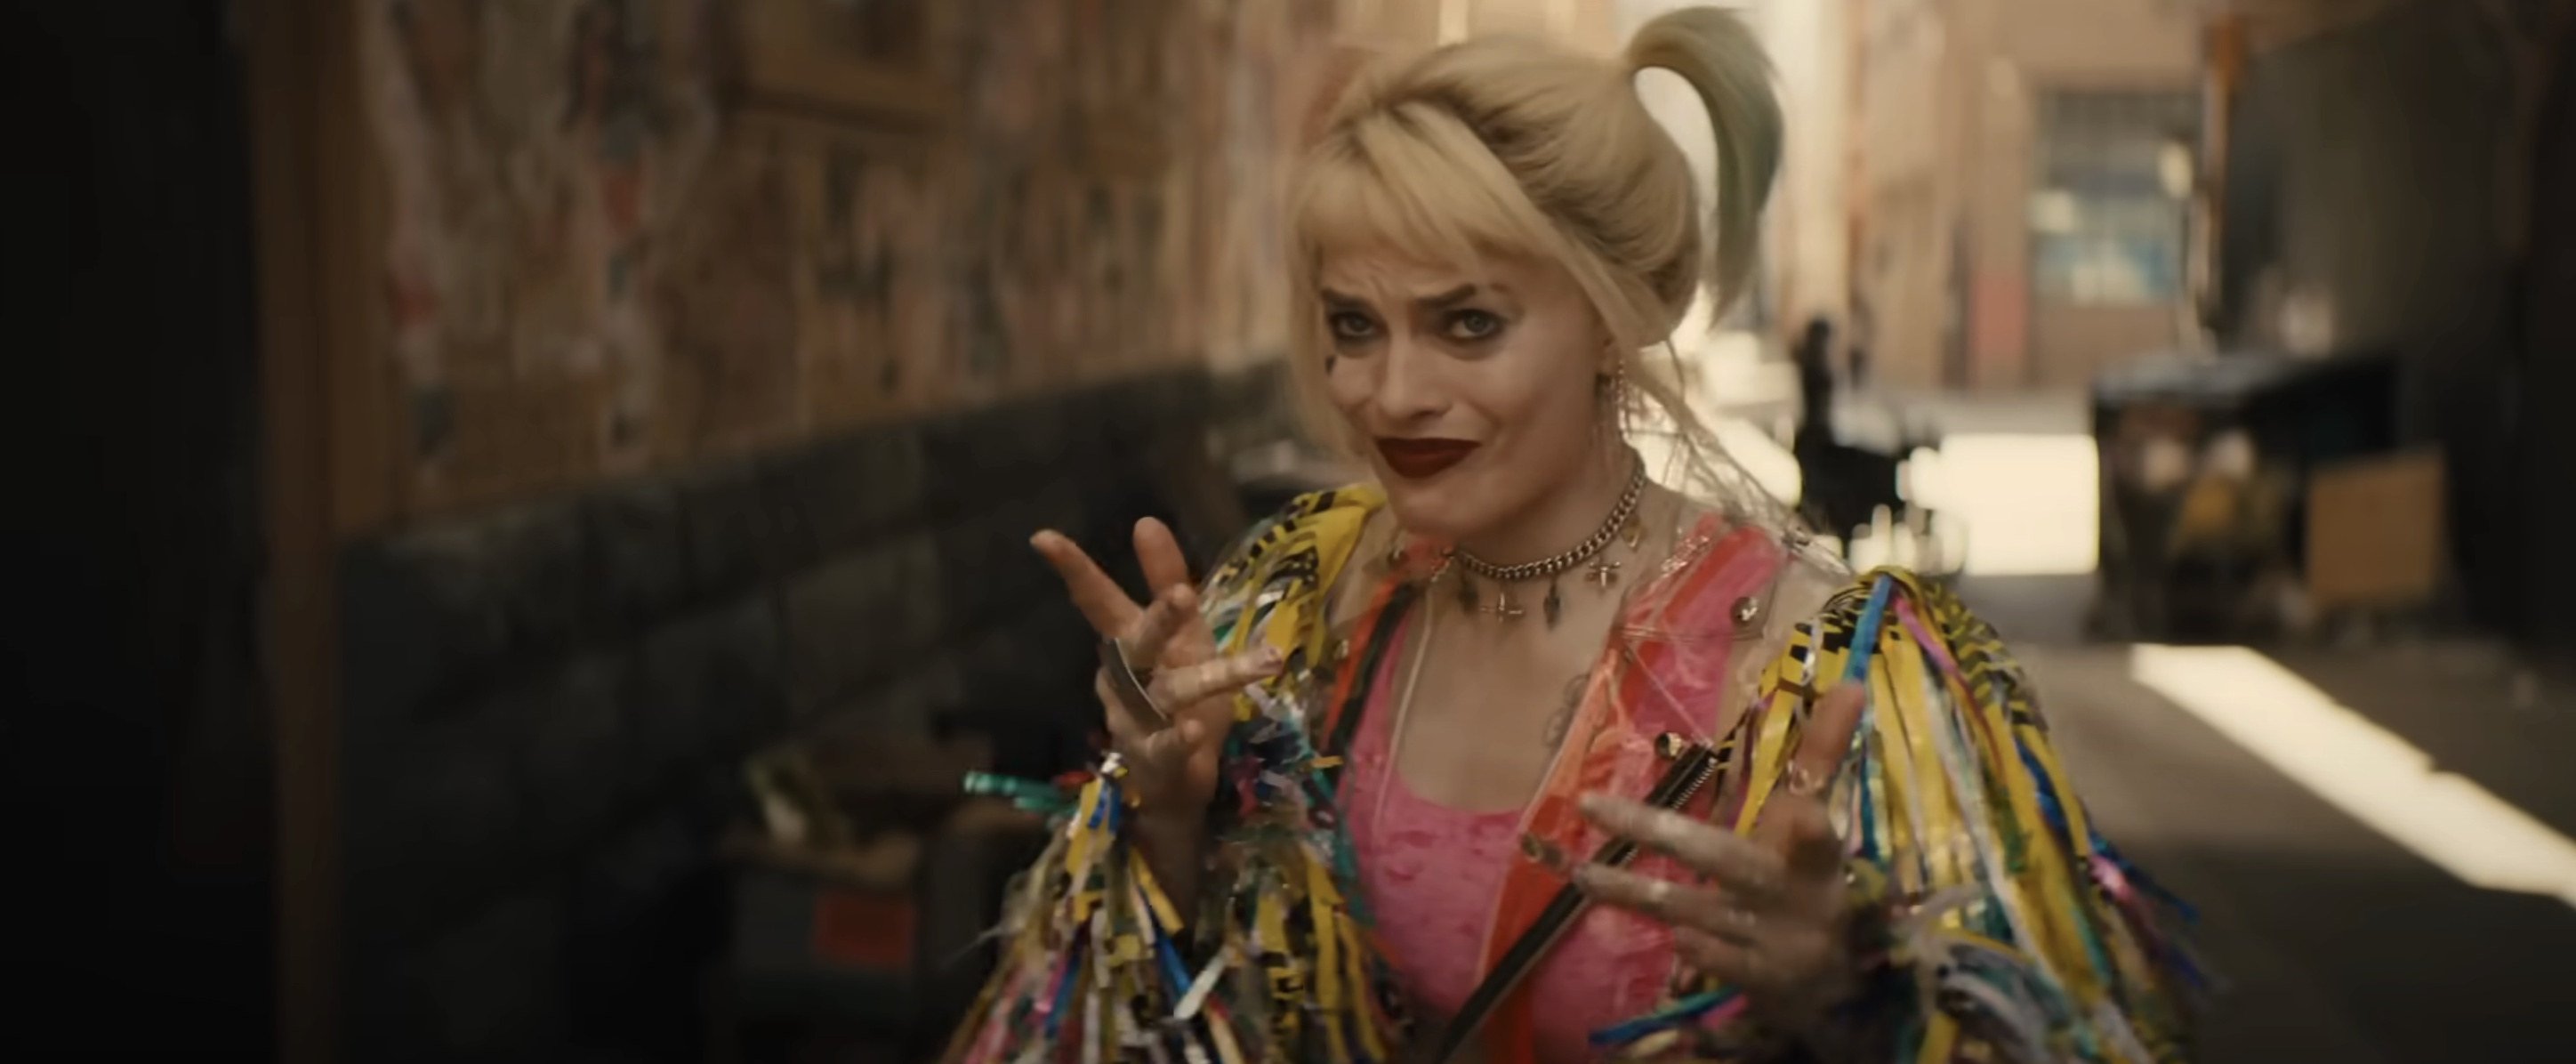 Harley Quinn smirks with a playful pose, wearing a colorful jacket with fringe details